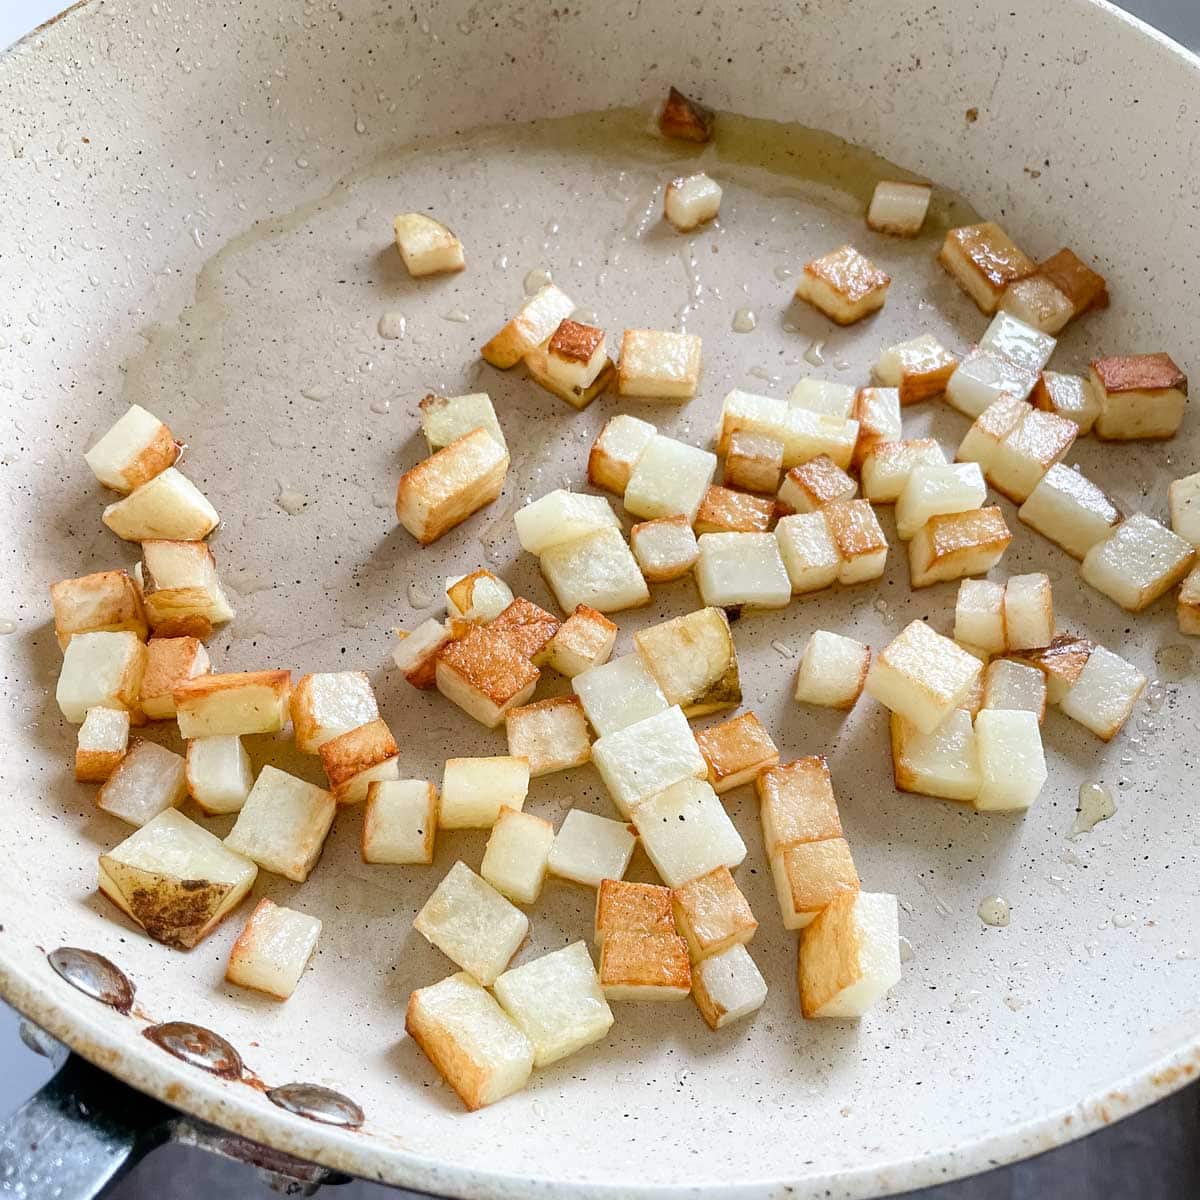 Browned potatoes are shown in a white pan.